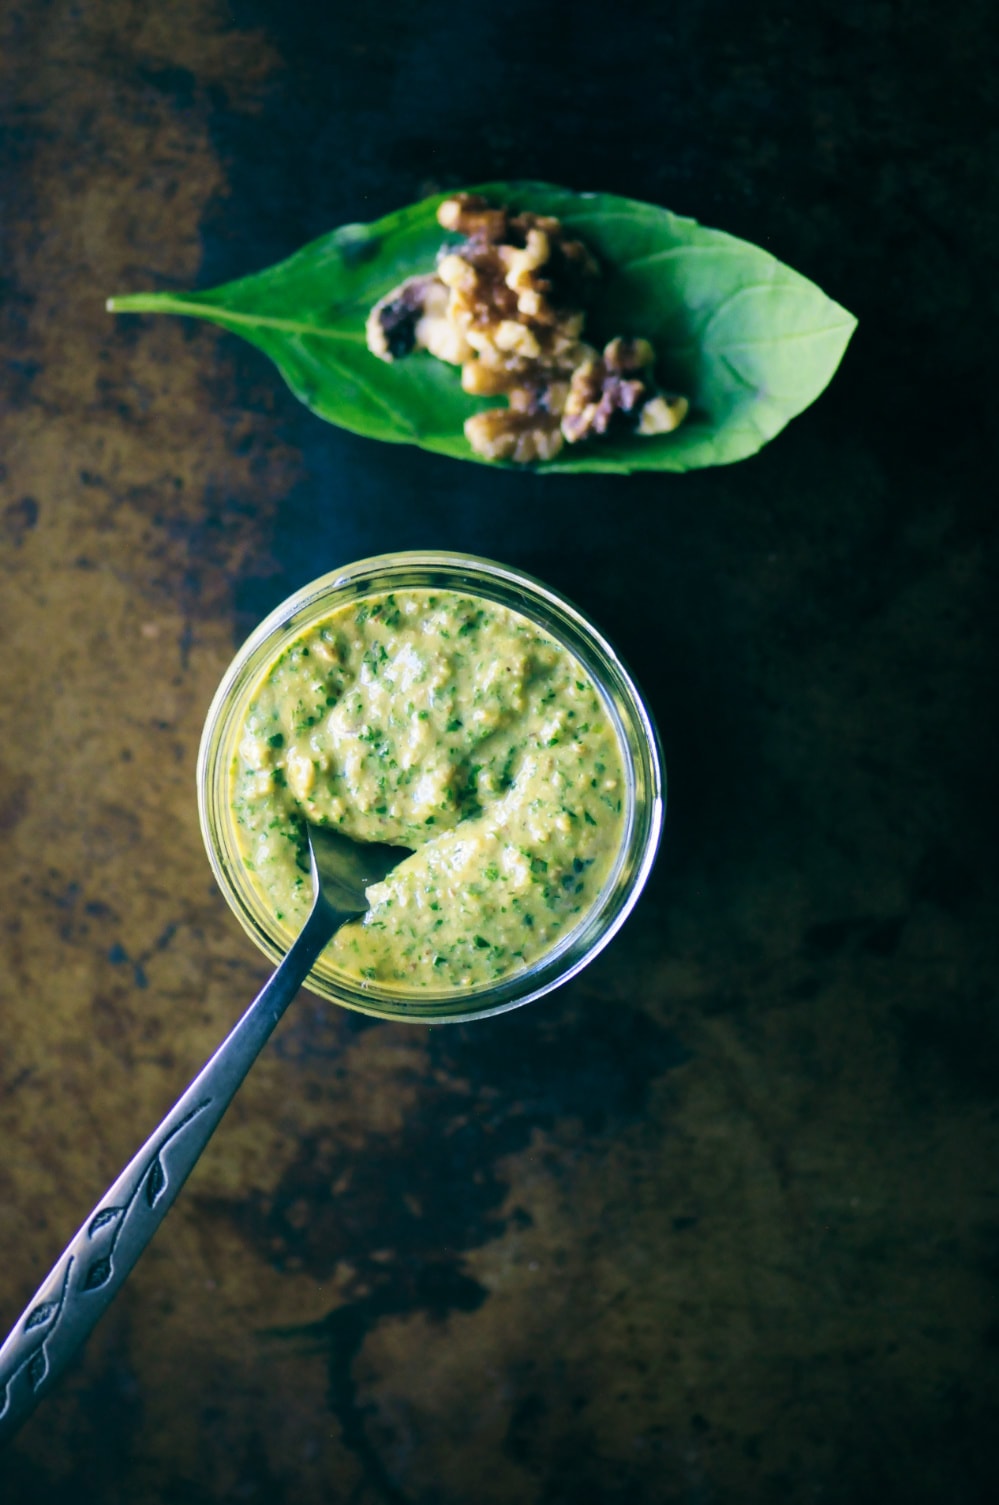  This amazingly creamy and delicious Cheesy Vegan Walnut Pesto is made from a blend of basil, spinach, kale, garlic, walnuts, and nutritional yeast! It is vegan, gluten-free, healthy, vibrant and ridiculously tasty. It makes for one perfect green condiment ready to use on just about any savory dish! #veganpesto #walnutpesto #cheesyveganpesto #easypesto 